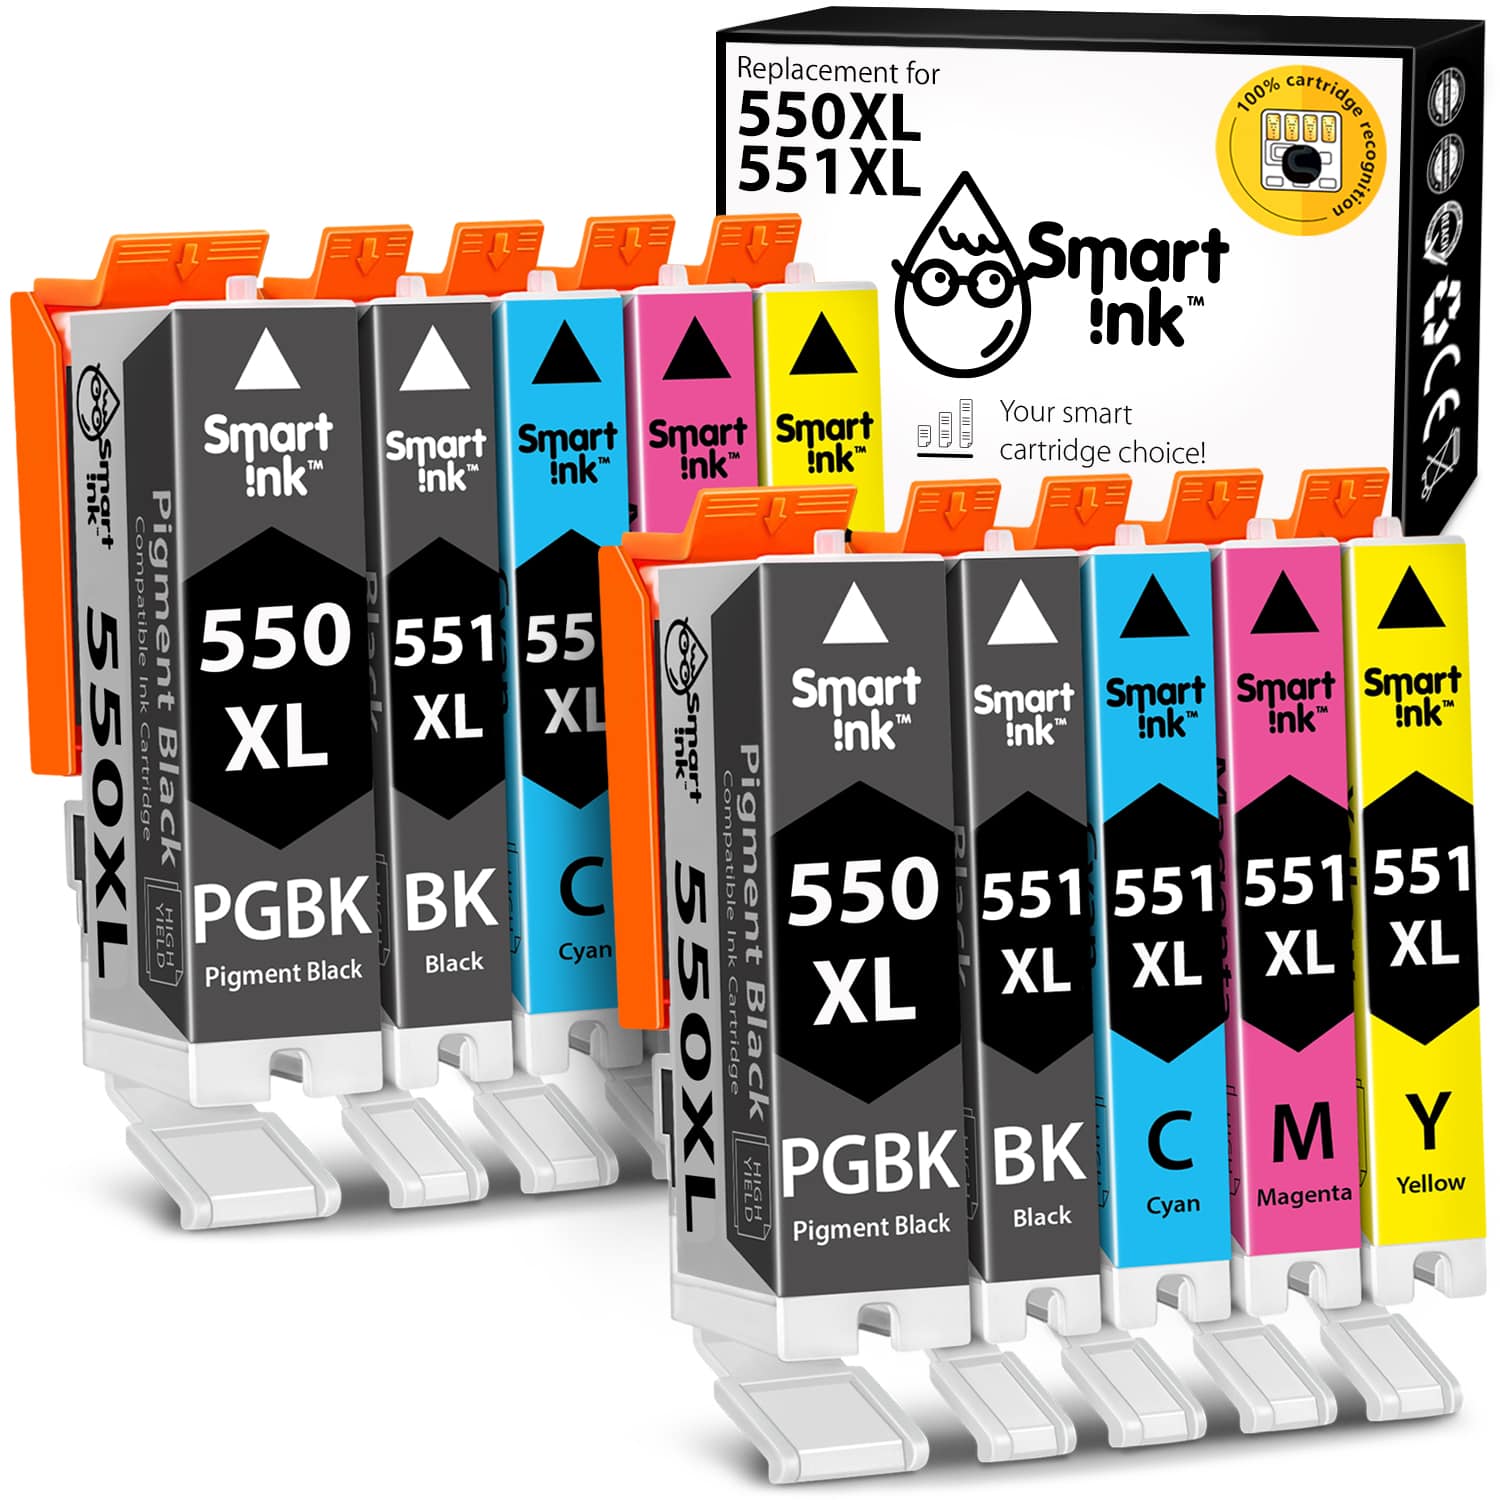 Canon 551 XL (MultiPack) Ink Cartridge Replacement - Buy Printer Cartridges in at the best price Smart Ink